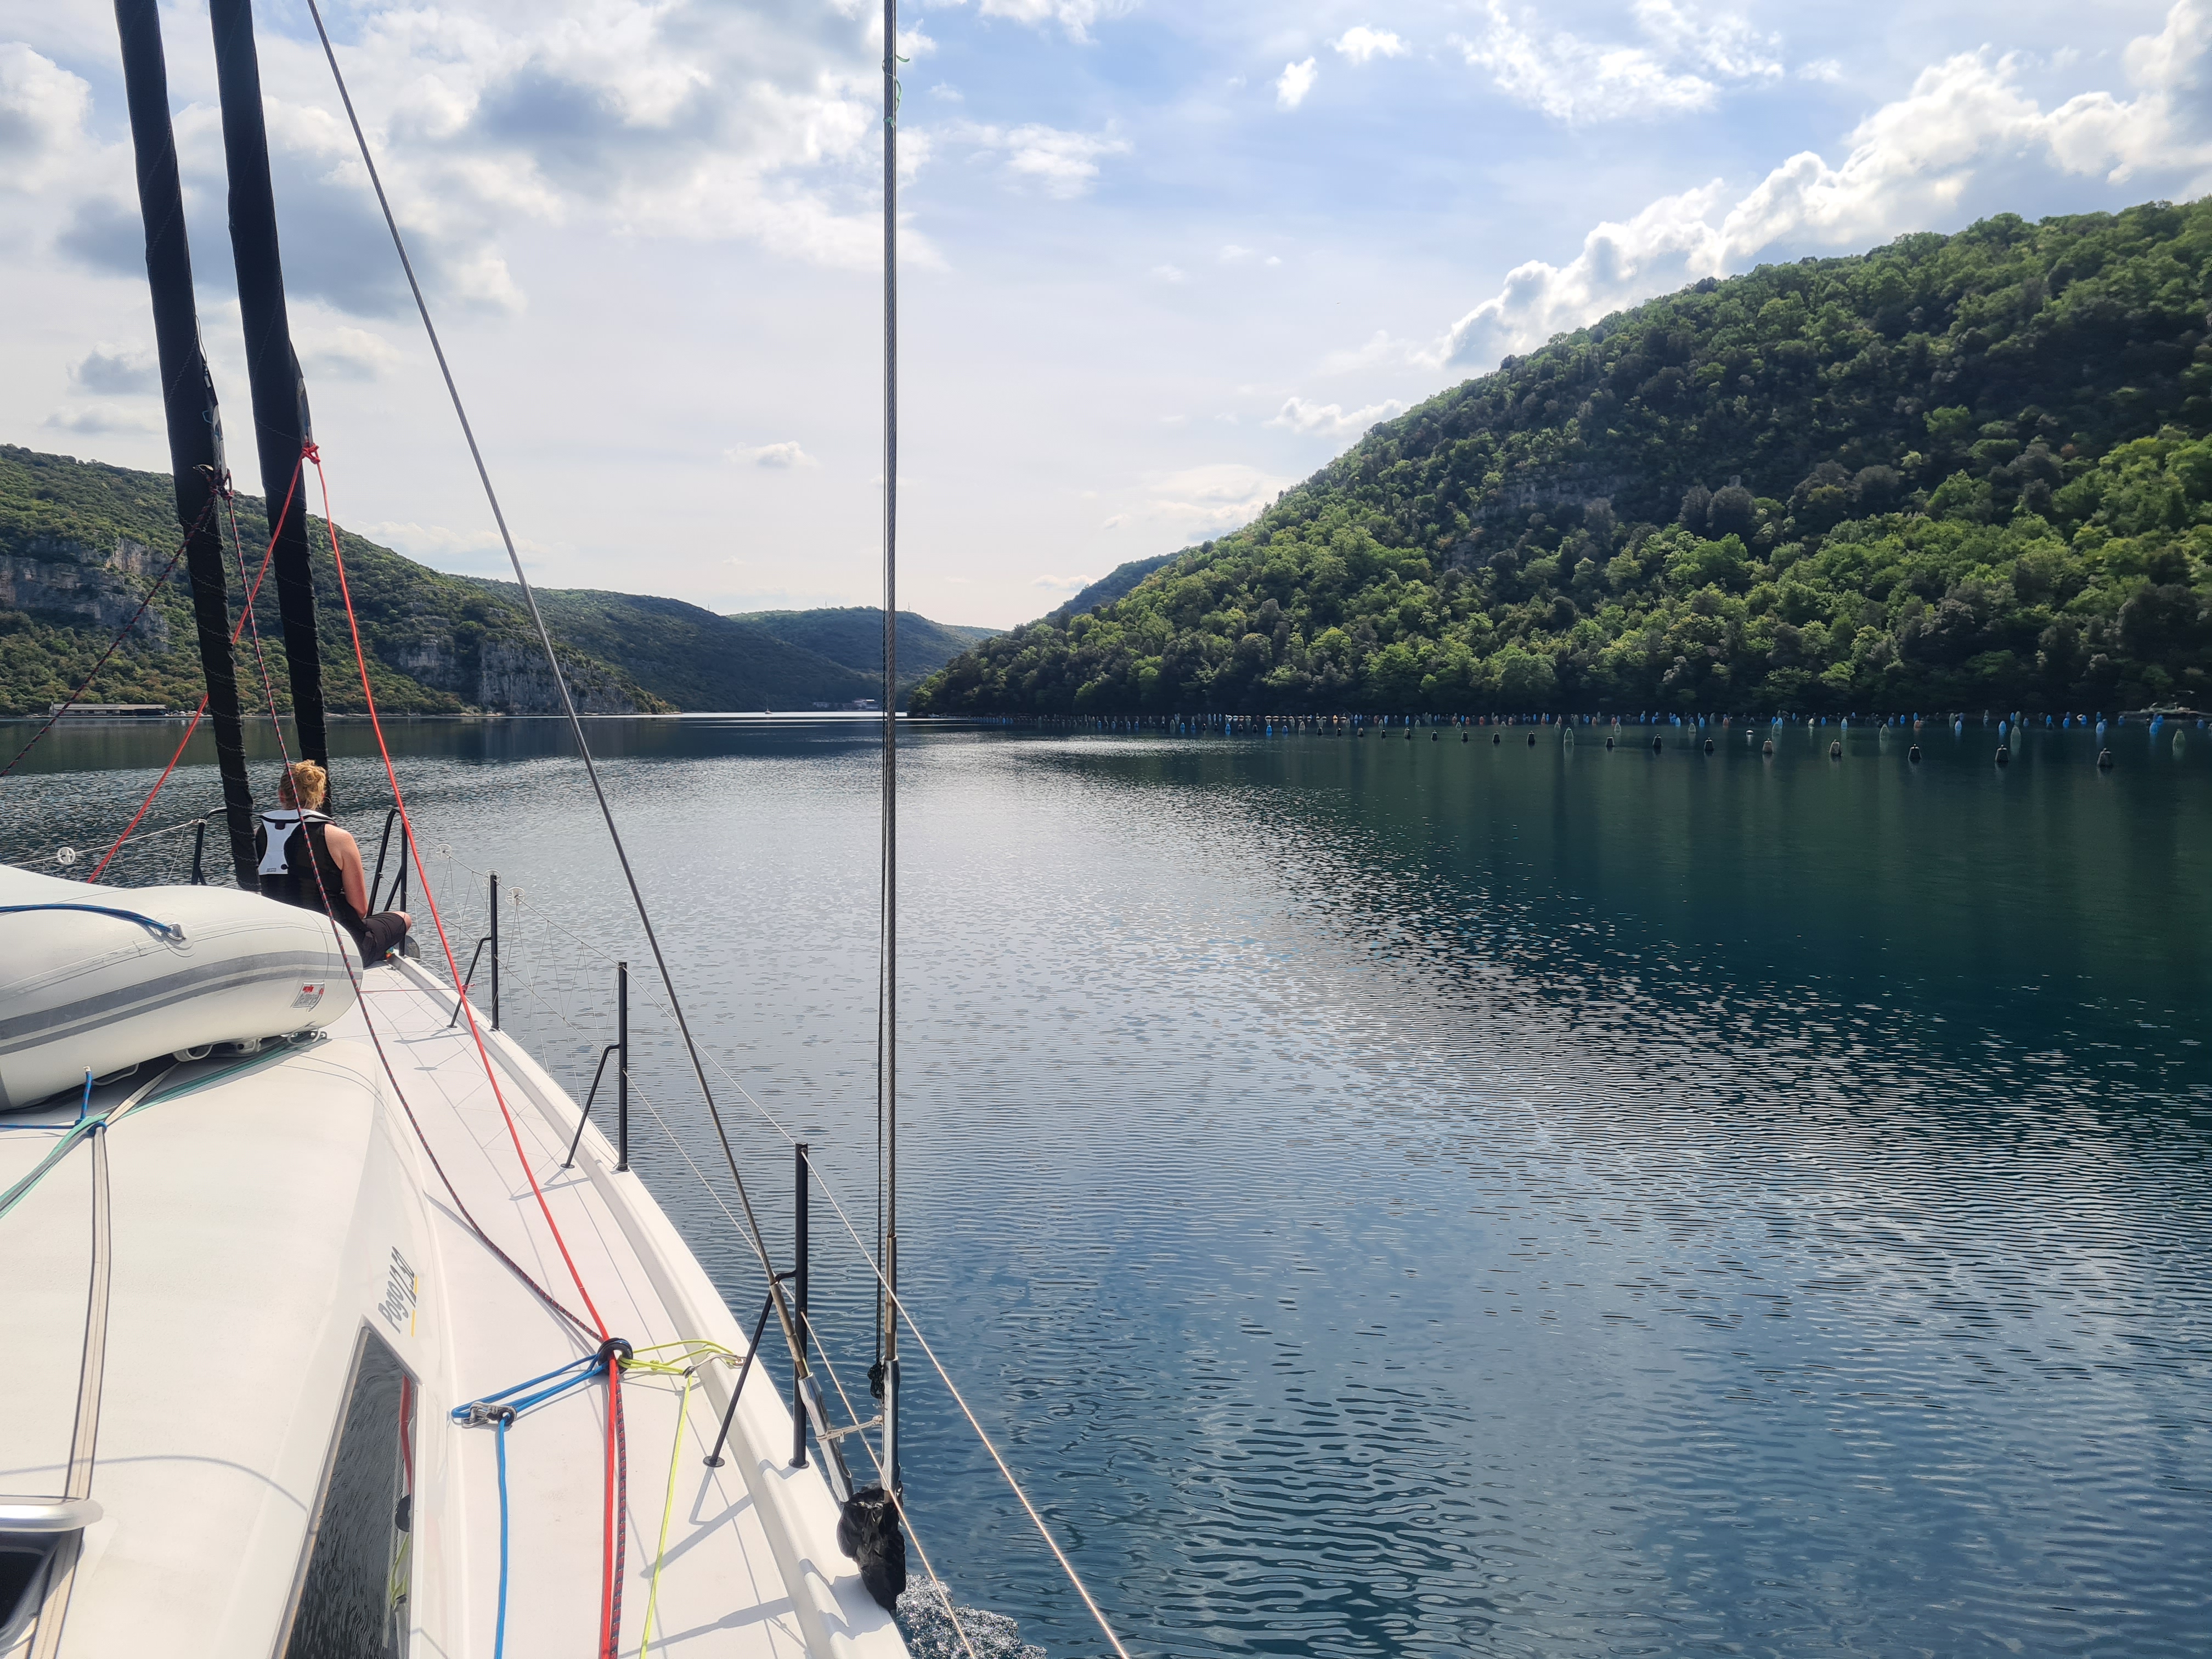 Croatia's only fjord